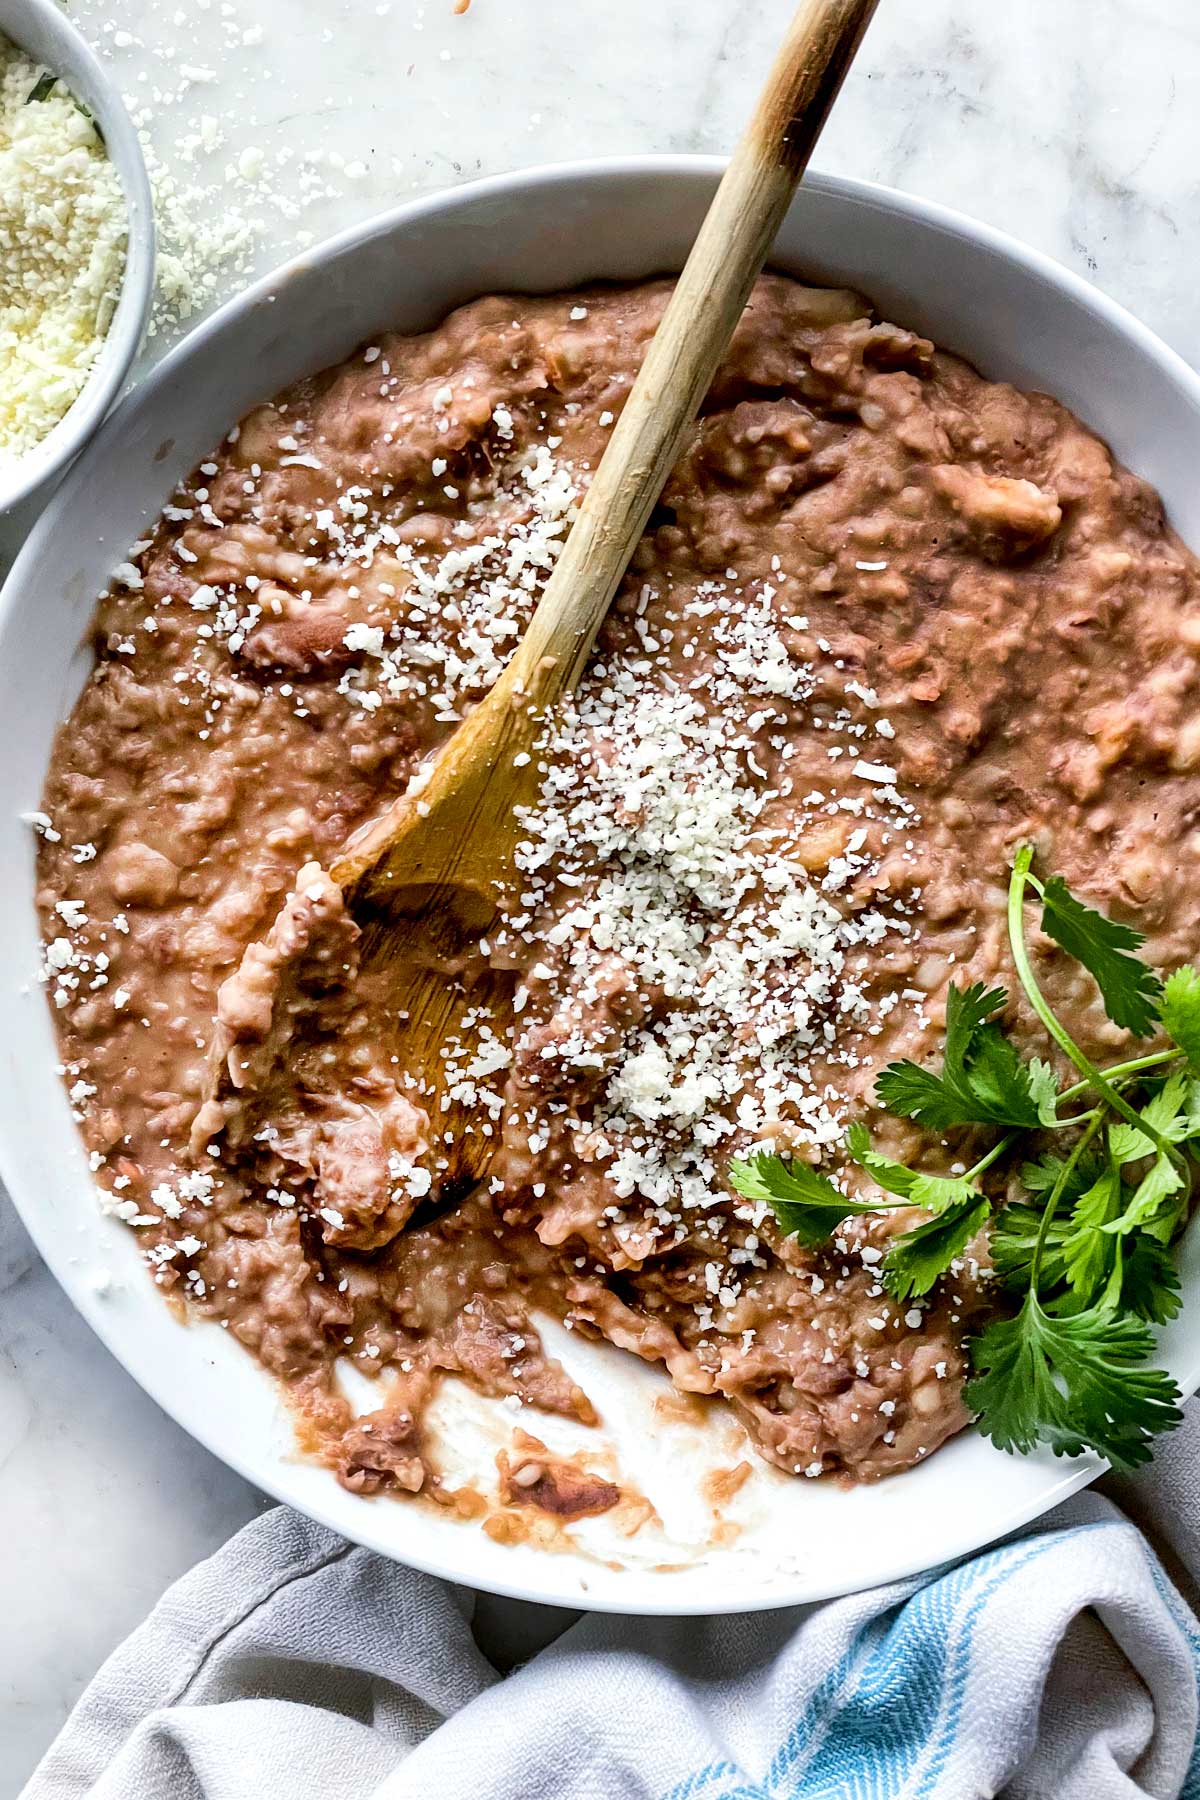 How to Make THE BEST Refried Beans